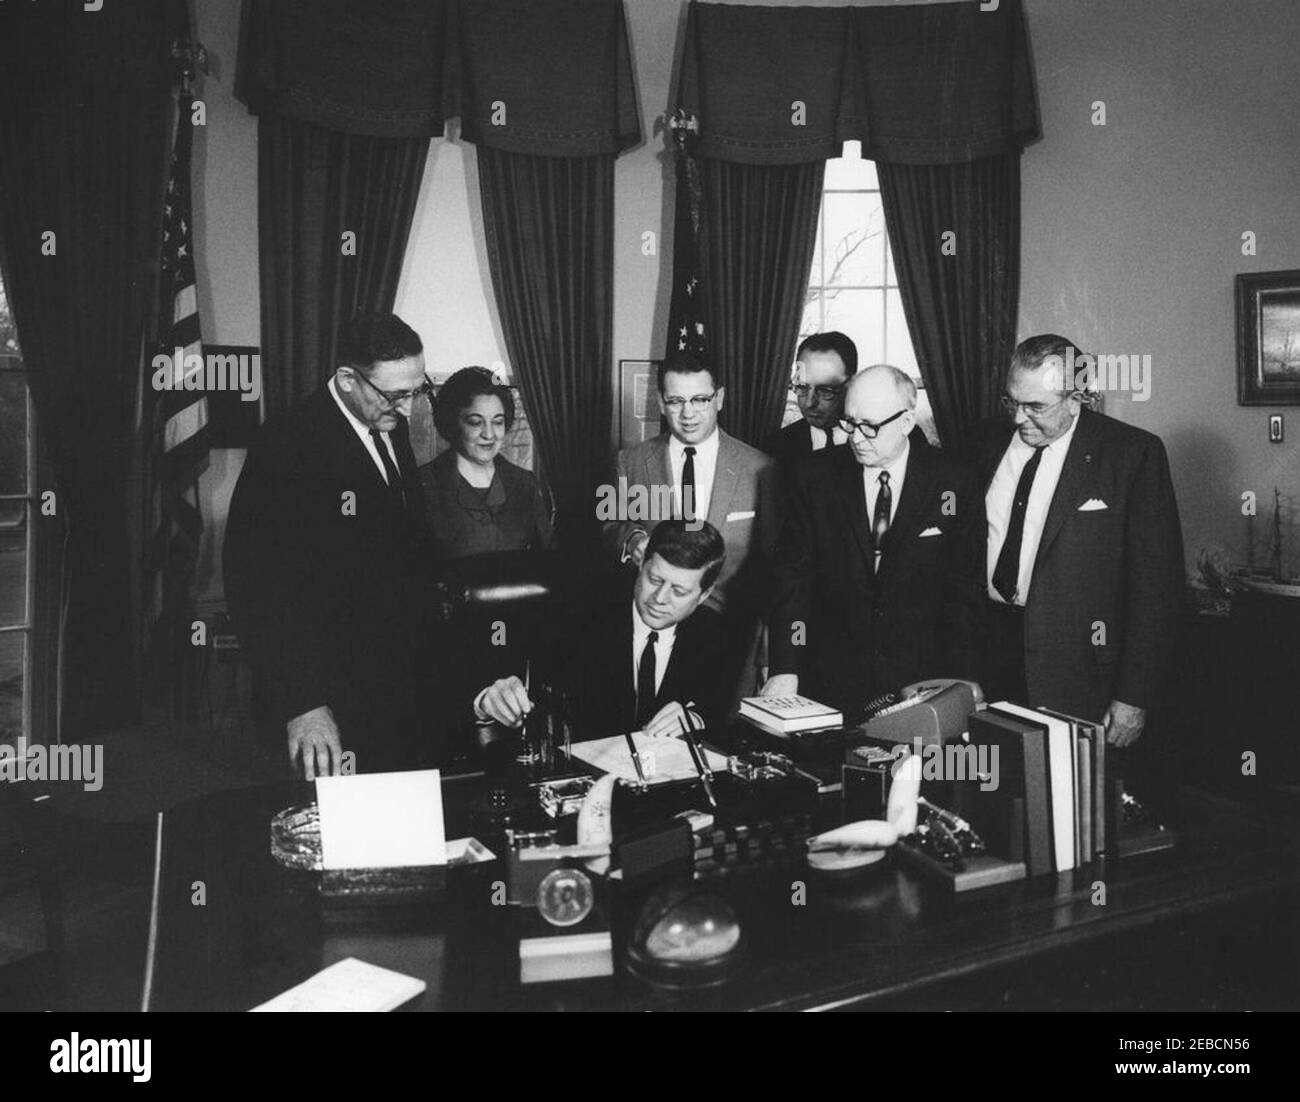 Bill signing u2013 HR 2470, a Bill to create a Lincoln Boyhood National Memorial in the state of Indiana, 10:15AM. President John F. Kennedy prepares to sign HR 2470, a bill to authorize the creation of the Lincoln Boyhood National Memorial in Indiana. Looking on are (L-R): Congressman Fred Schwengel (Iowa); Isadora Skora, a Lincoln scholar from Evansville, Indiana; Senator Vance Hartke (Indiana); William A. Koch, Indiana businessman; Roy T. Combs, President of the Indiana Lincoln Foundation; and Congressman Winfield K. Denton (Indiana). Oval Office, White House, Washington, D.C. Stock Photo